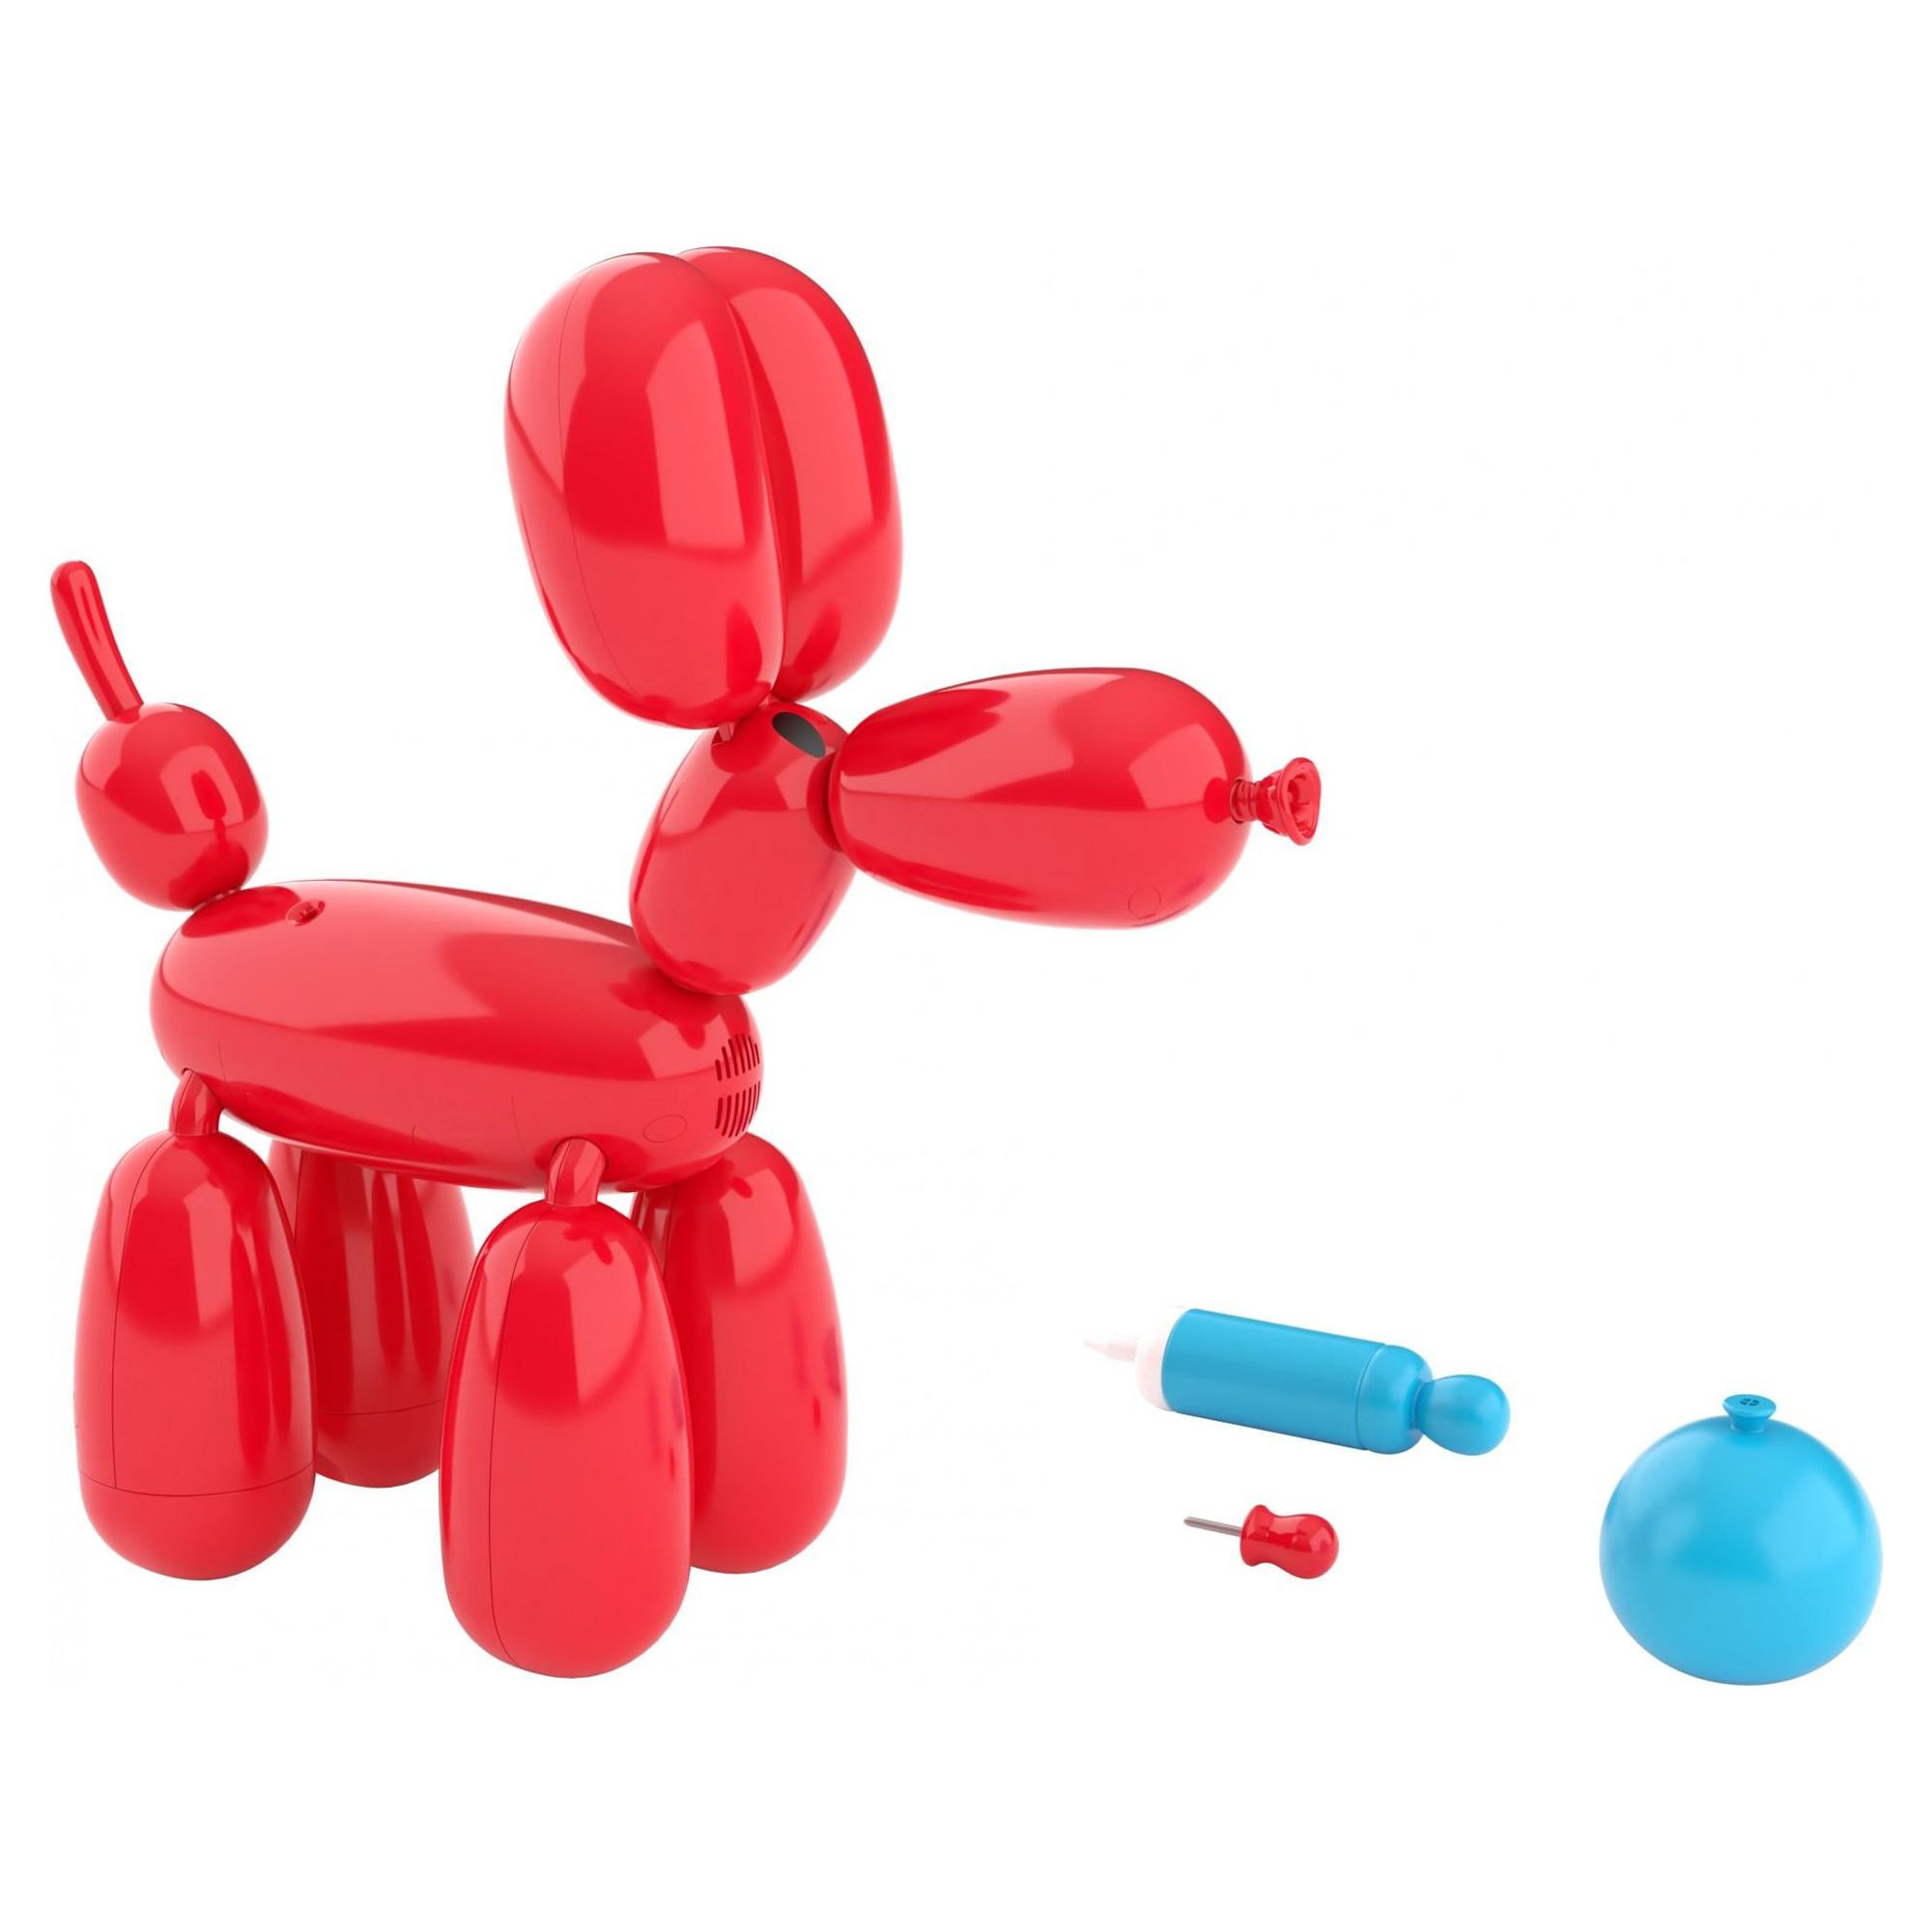 Squeakee the Balloon Dog - Makes Sound, Deflates, and Does Tricks! - Electronic Pets - image 1 of 17